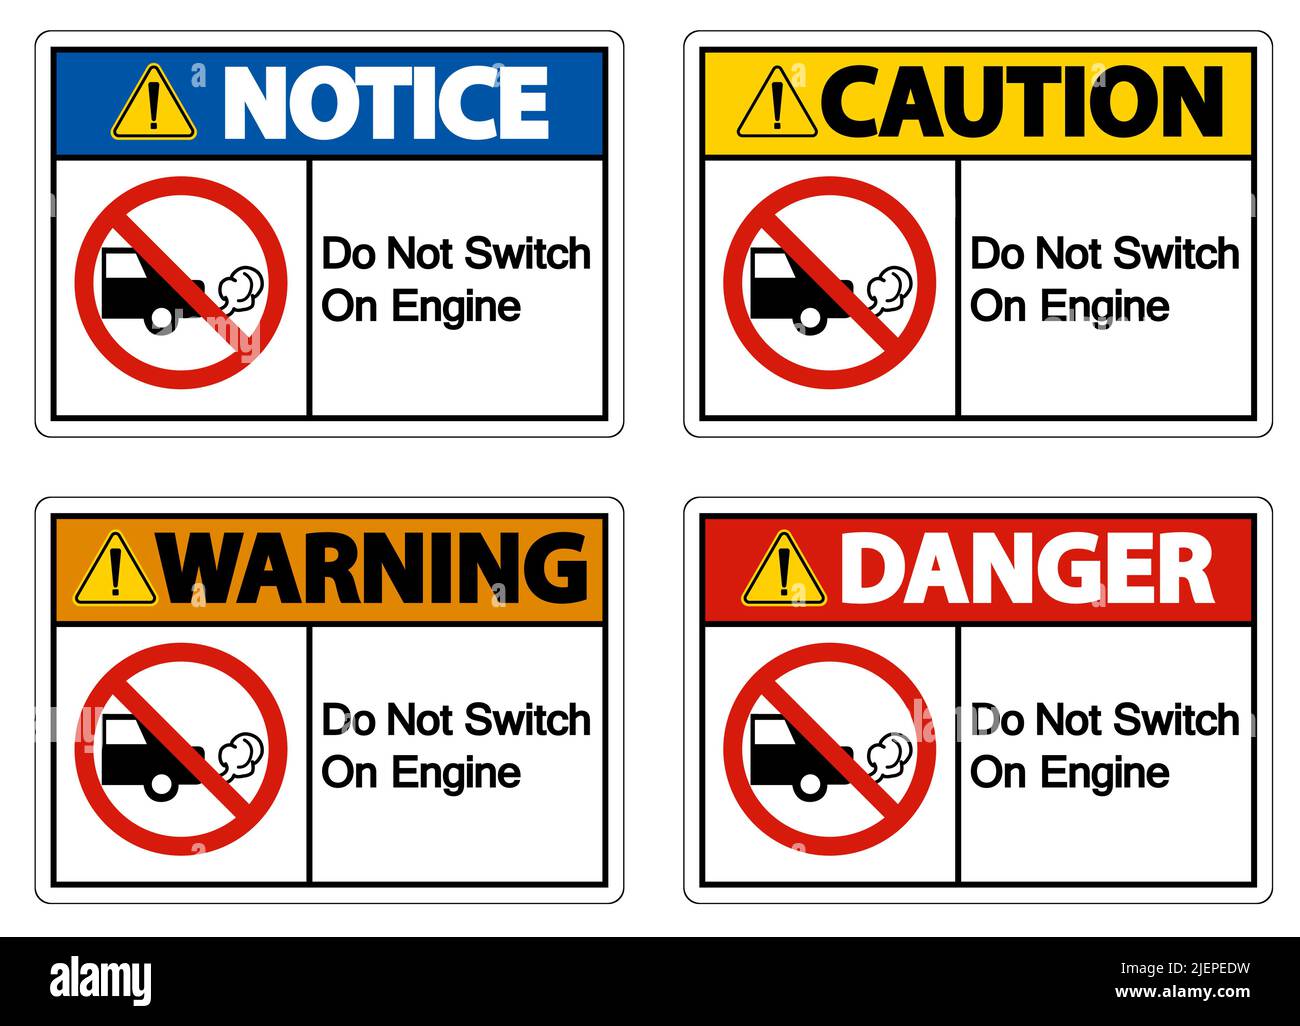 Do Not Switch On Engine Sign On White Background Stock Vector